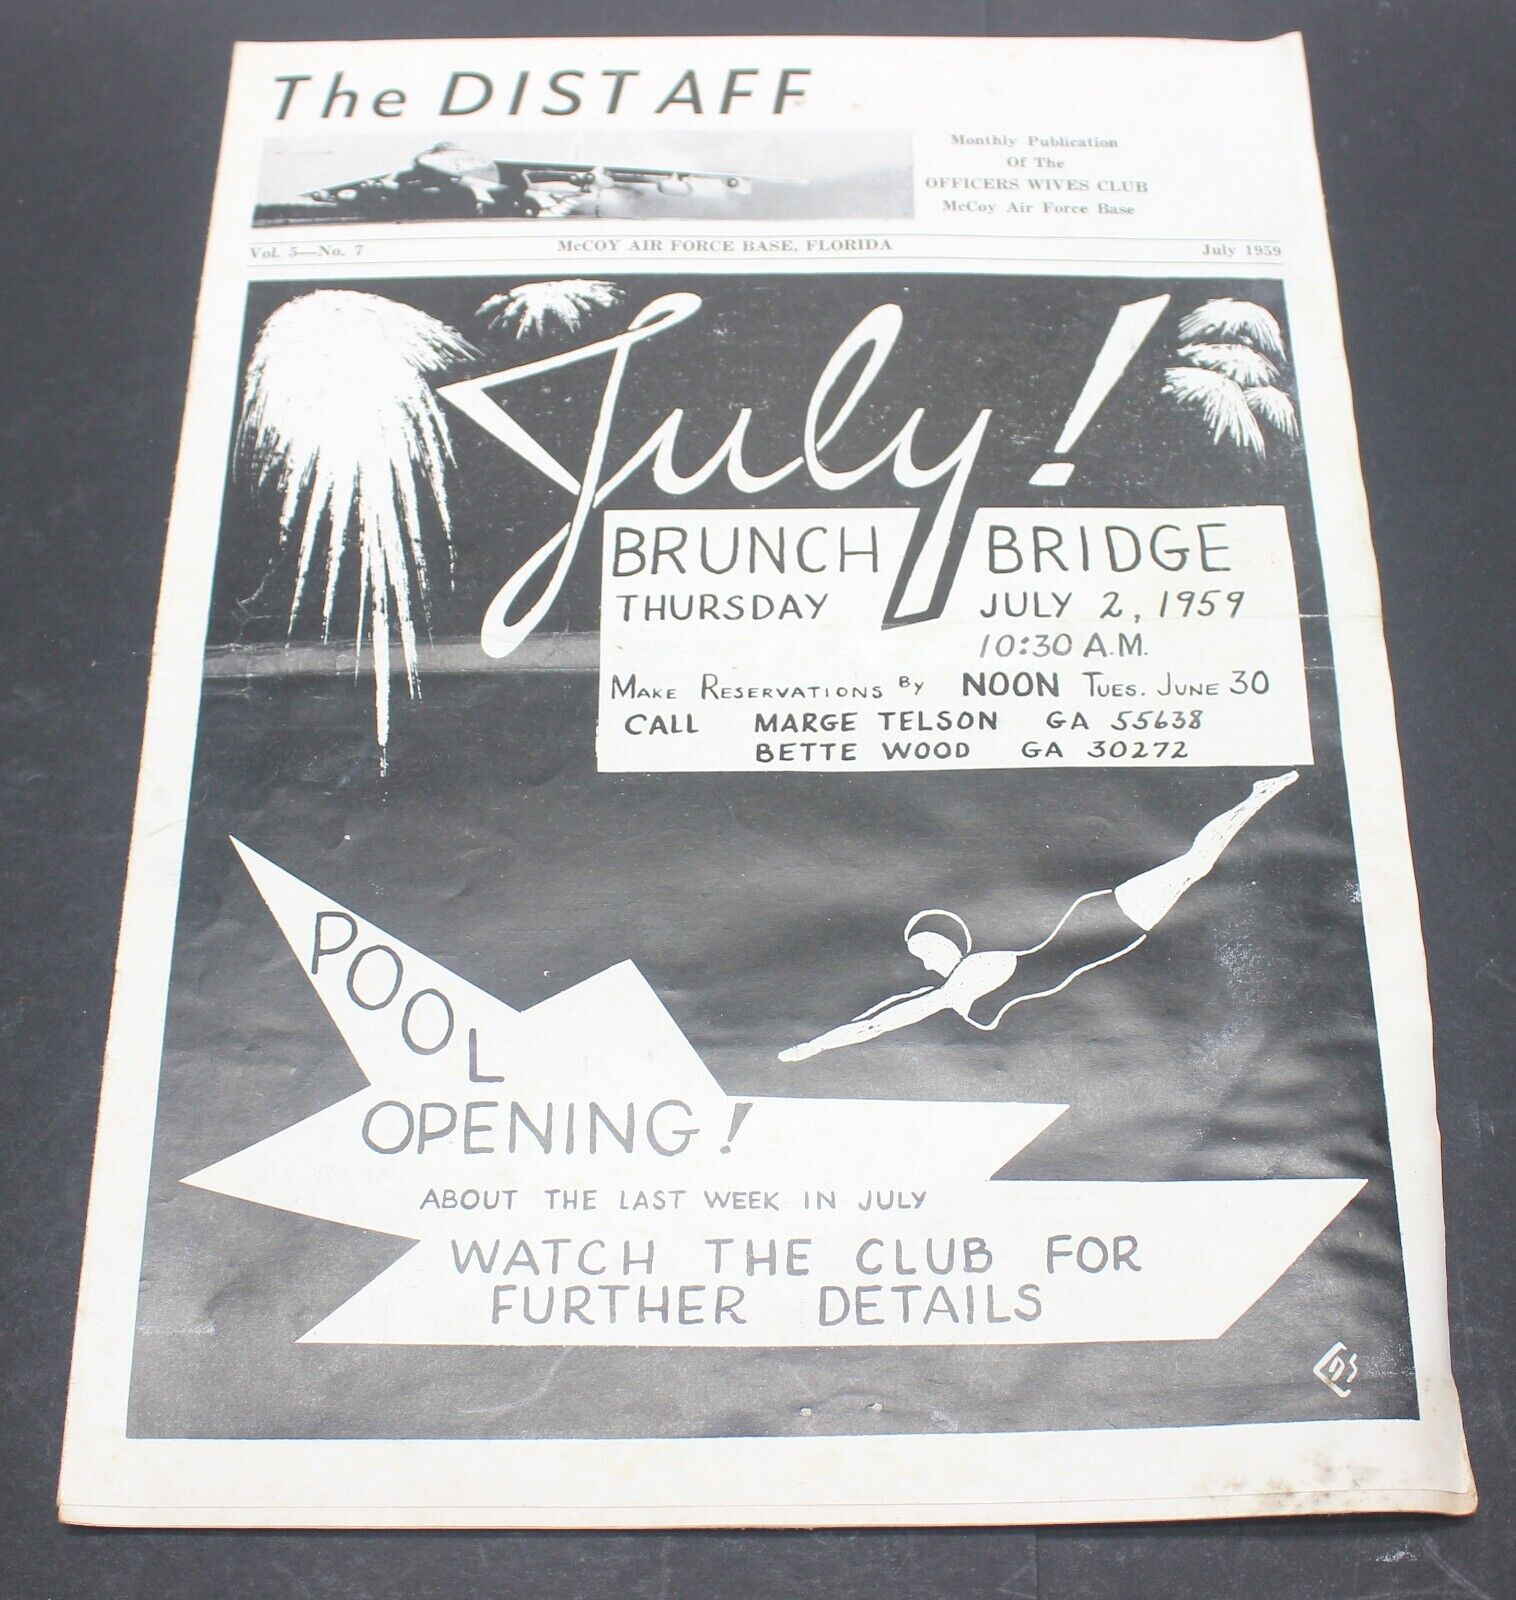 The Distaff McCoy Air Force Base Orlando FL Wives Club Newsletter July 1959